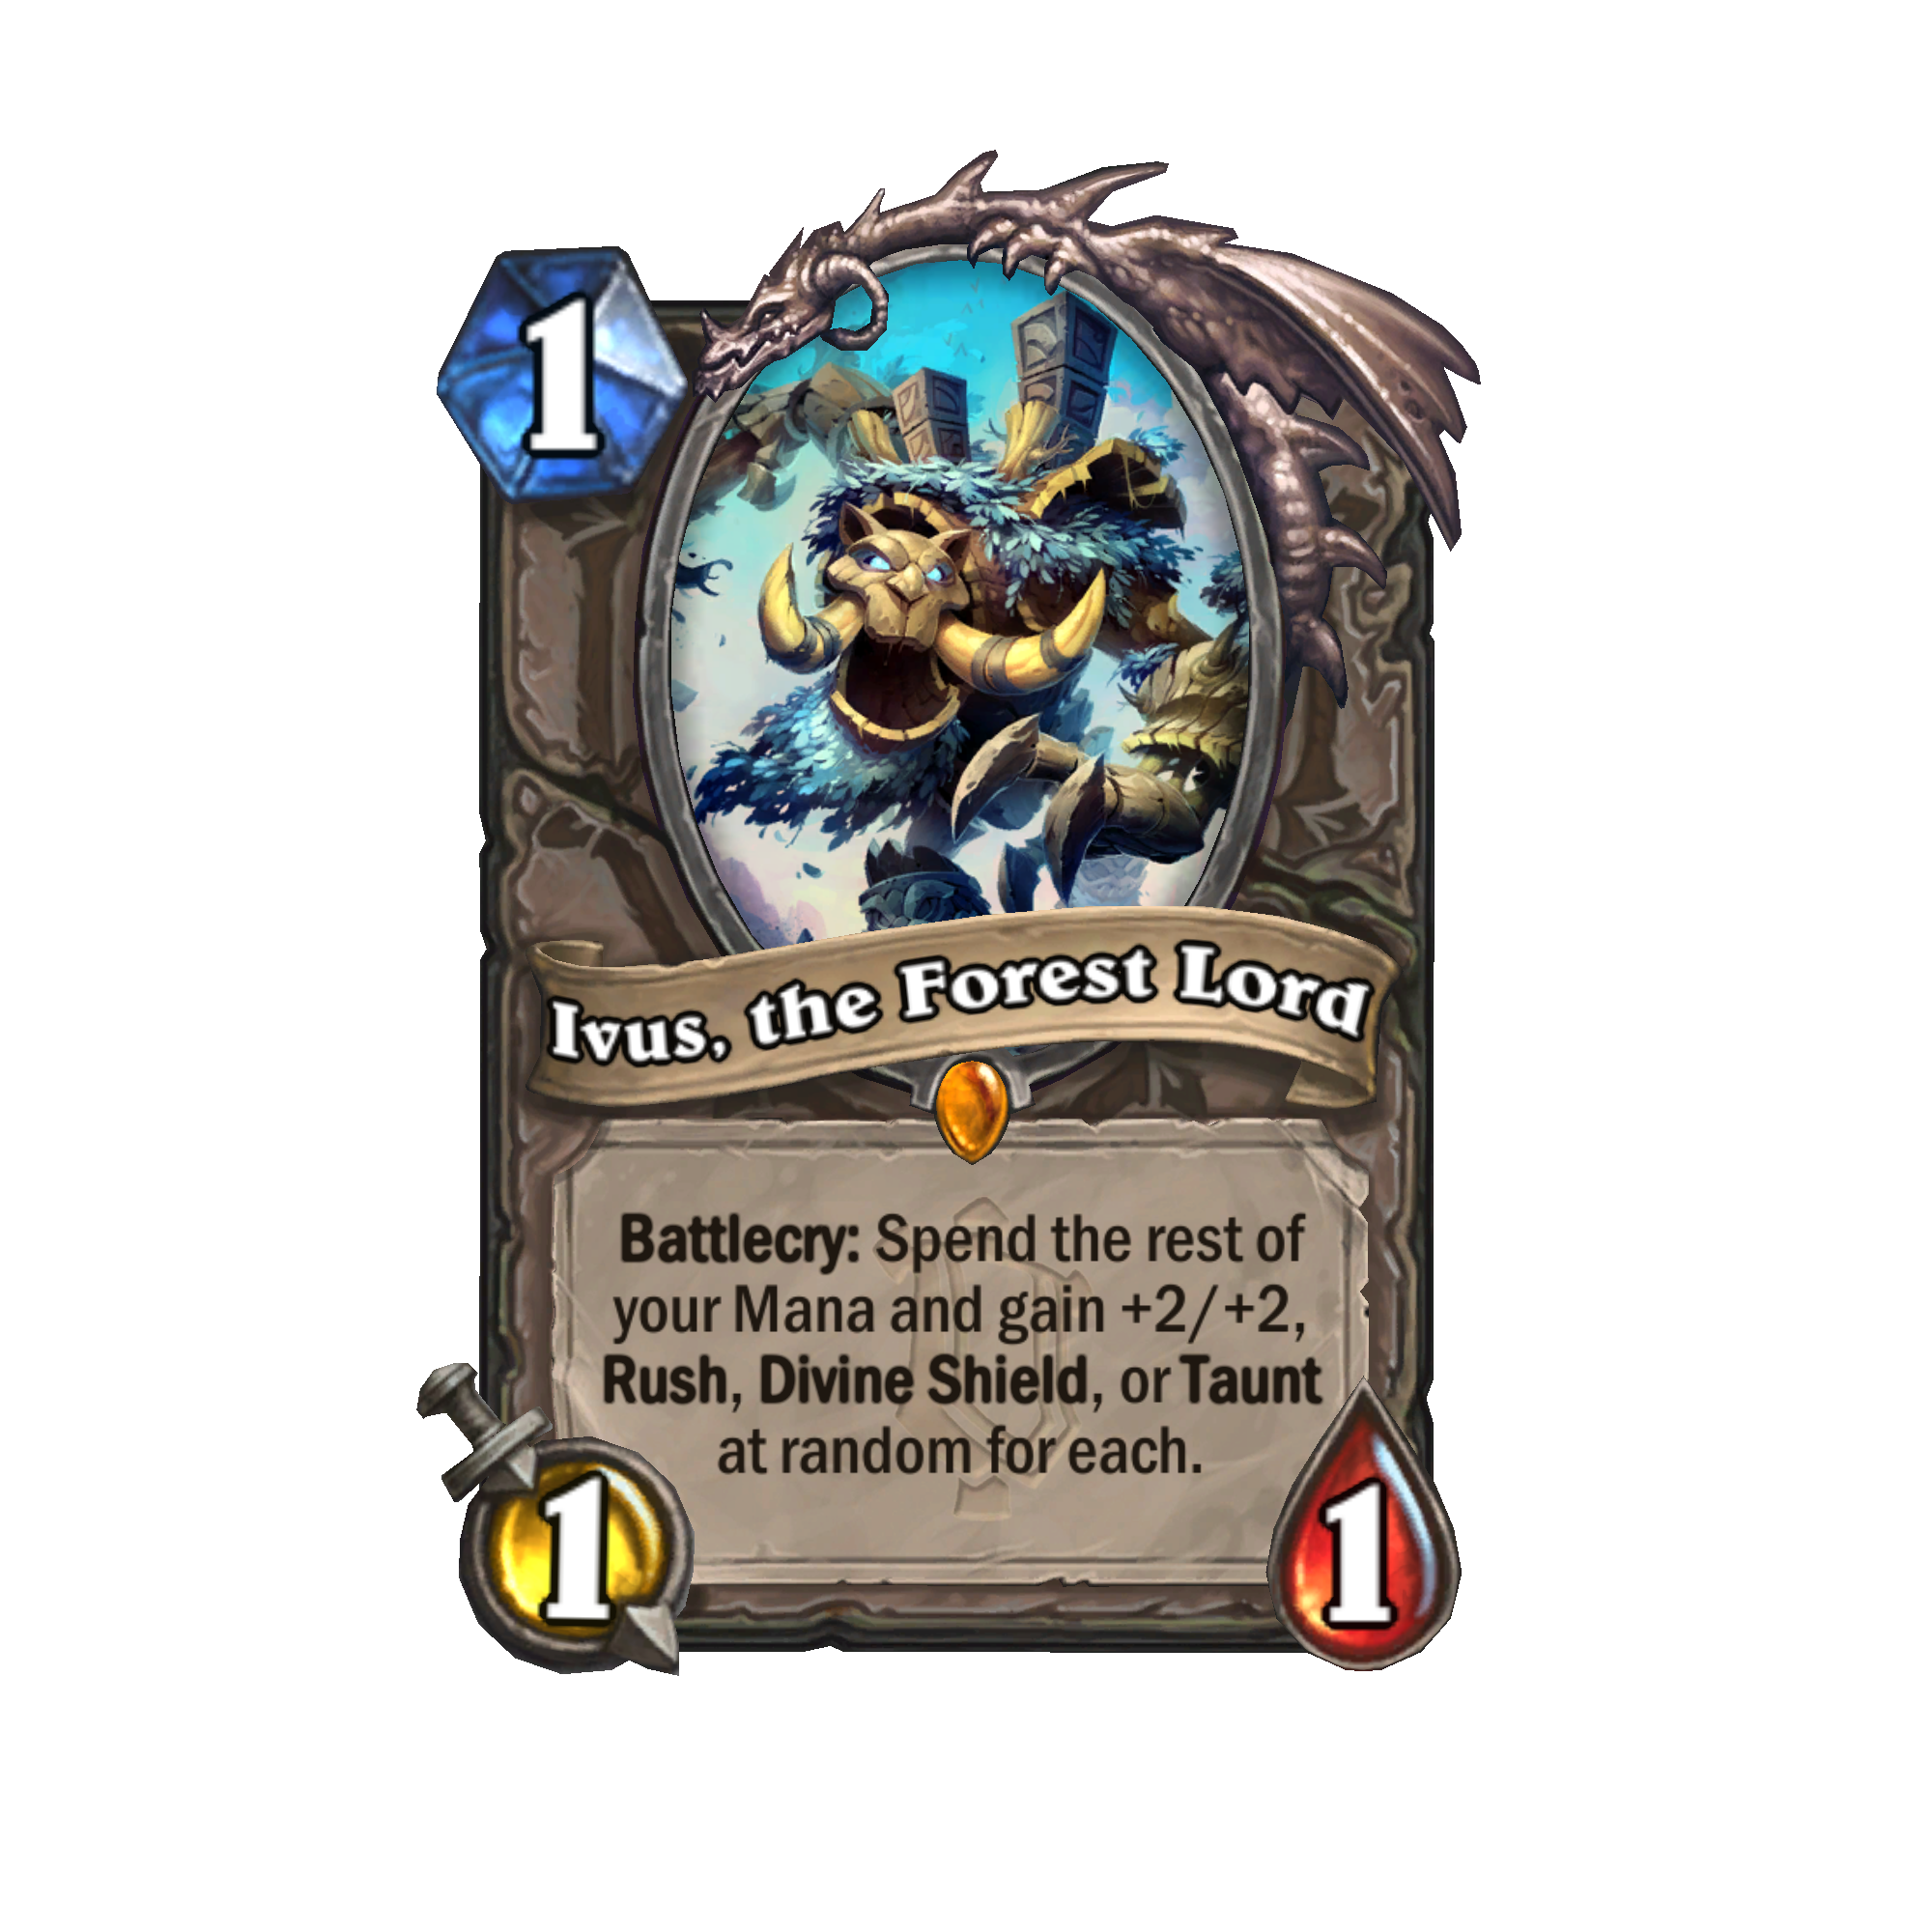 Exclusive Hearthstone card reveal: Ivus, the Forest Lord